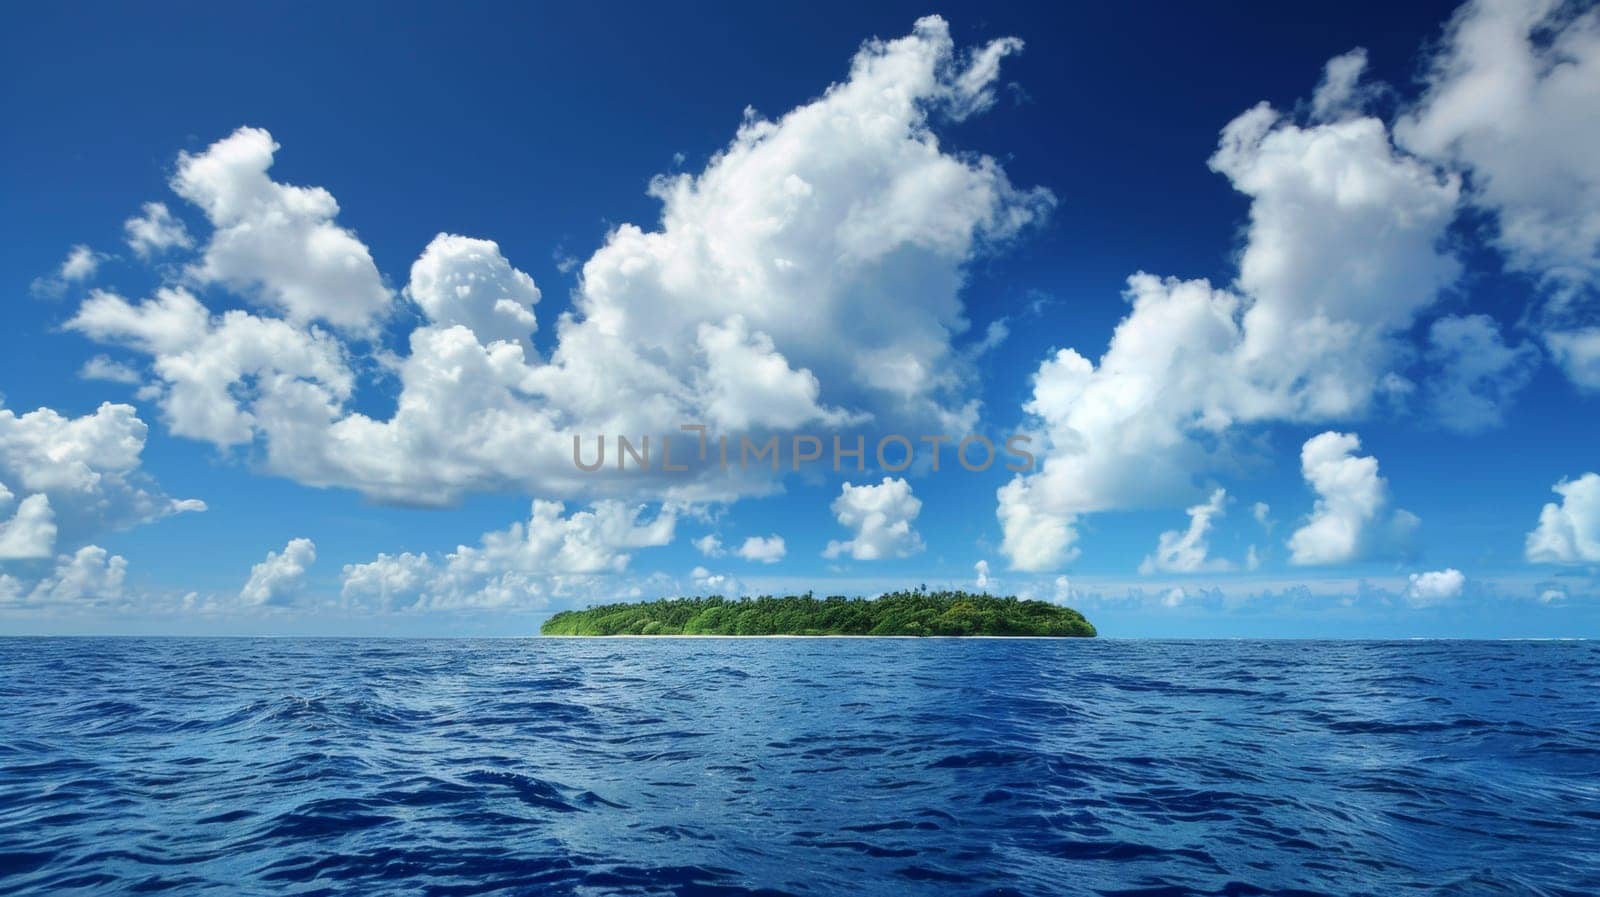 A small island in the middle of a large body of water